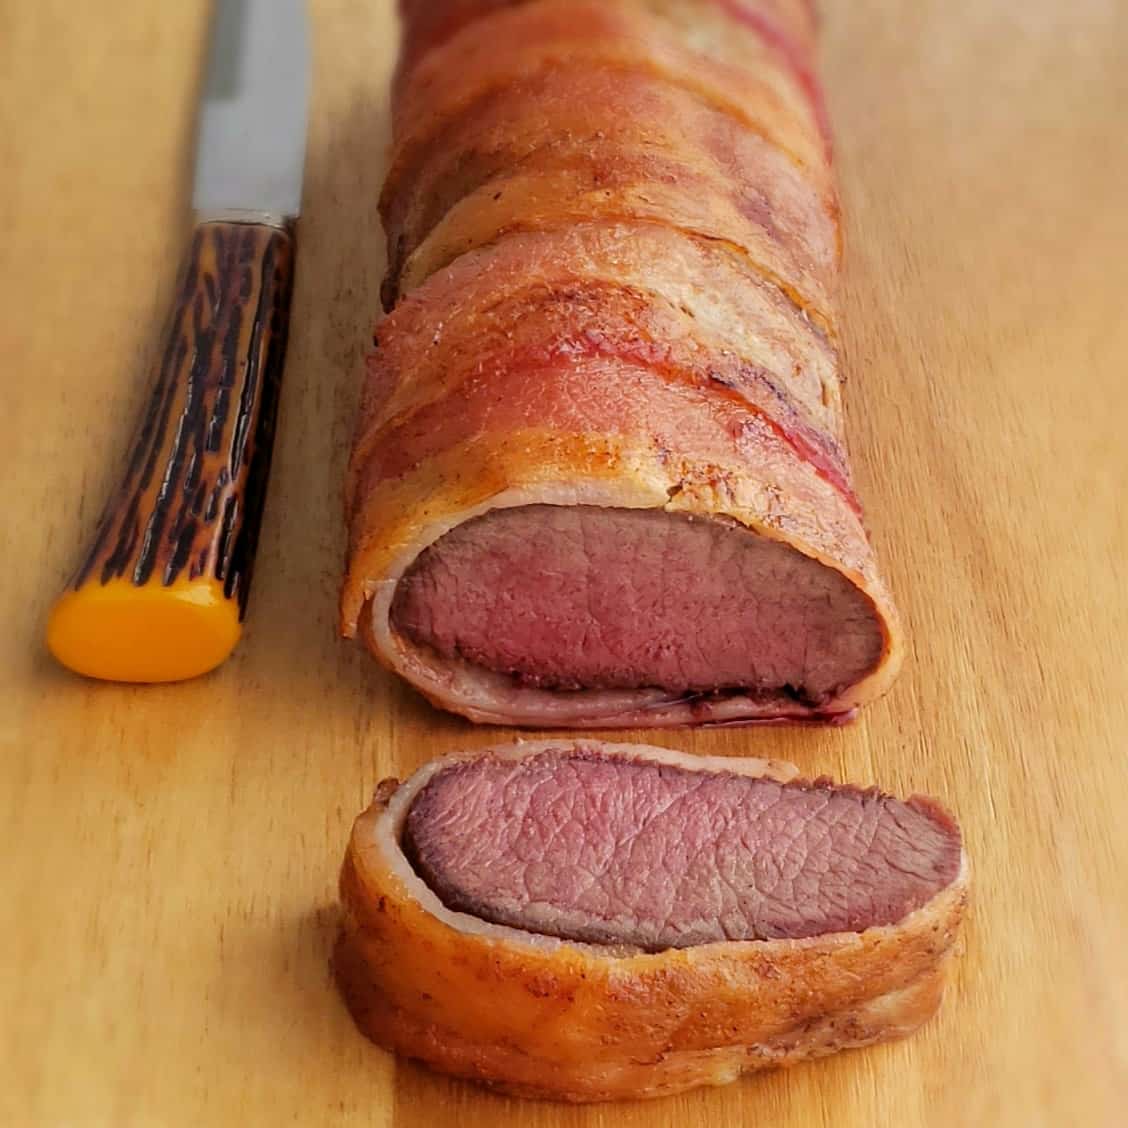 Bacon wrapped venison loin that is long and round with a knife beside. One round slice has been cut off the front showing the medium rare pink meat inside.